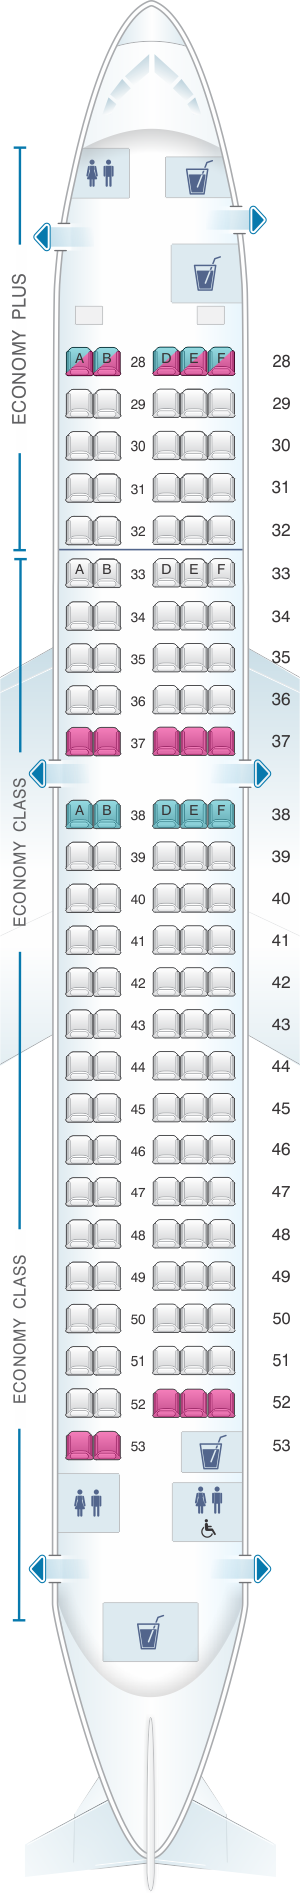 Korean Airlines Seating Chart